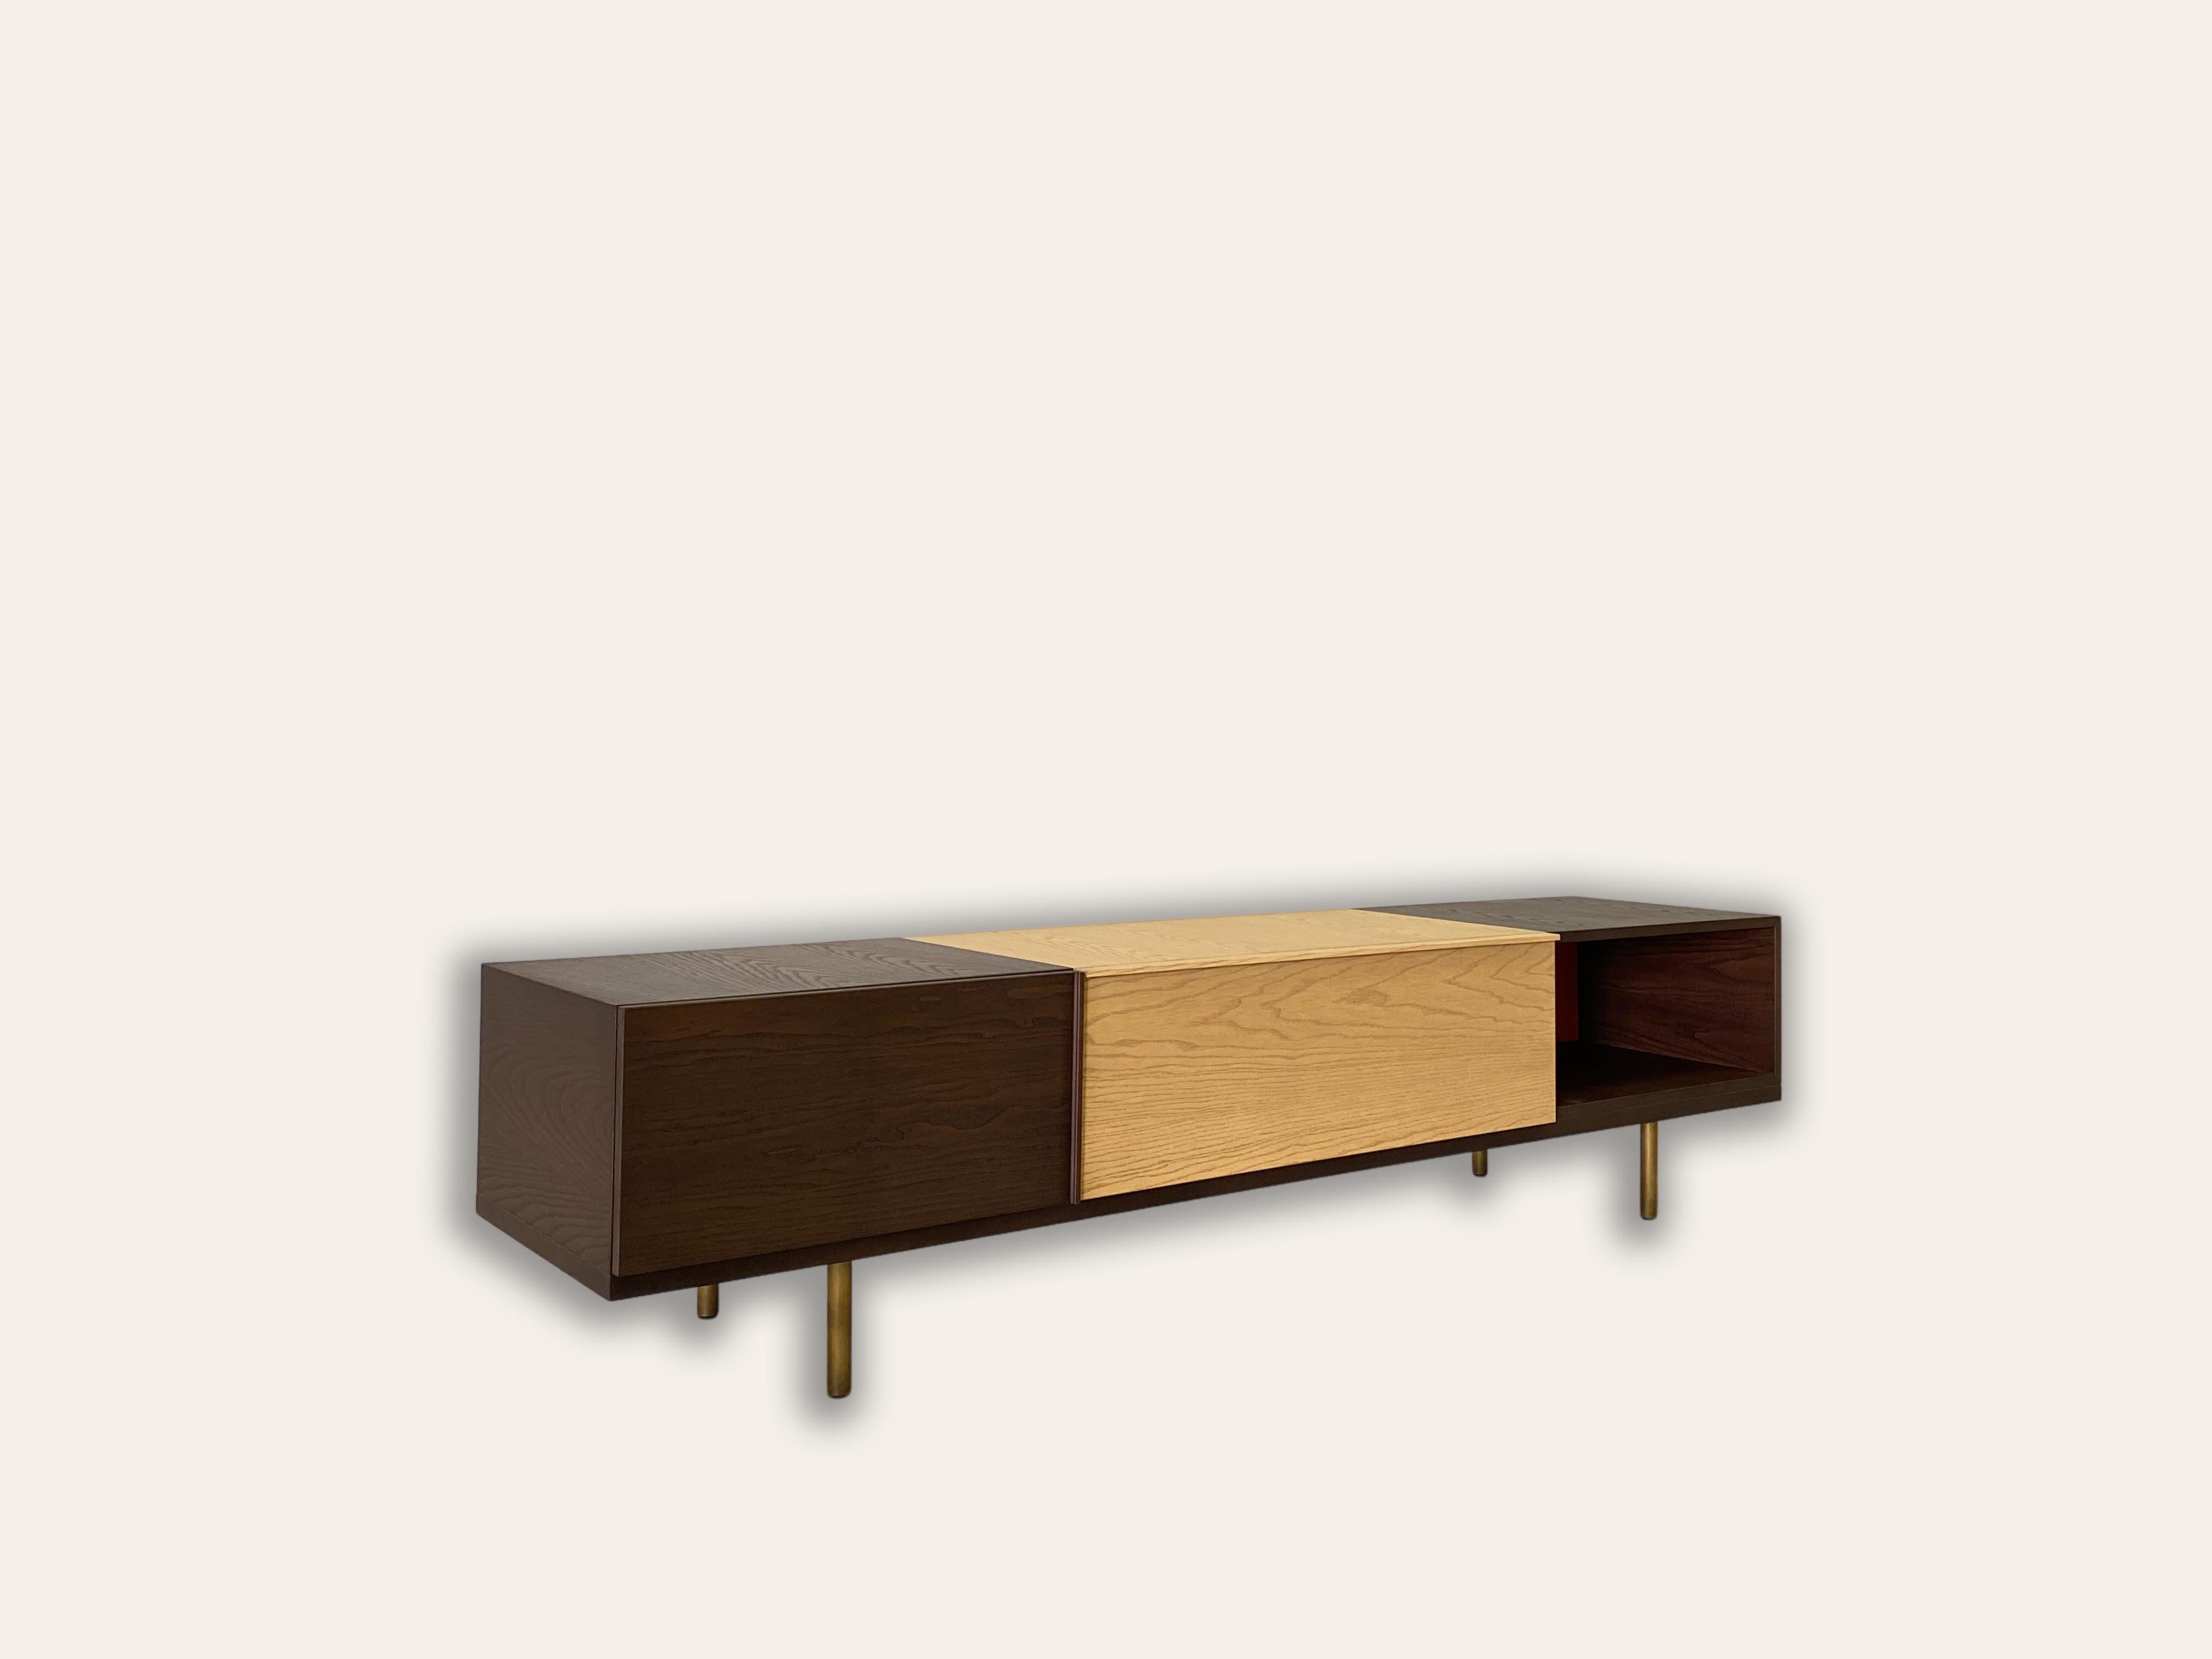 Morelato presents a new modular system with standing or hanging elements of different sizes, suitable to furnish many different spaces. Each element can be open, or with doors or drawers. The structure is made of ashwood in different color stains to